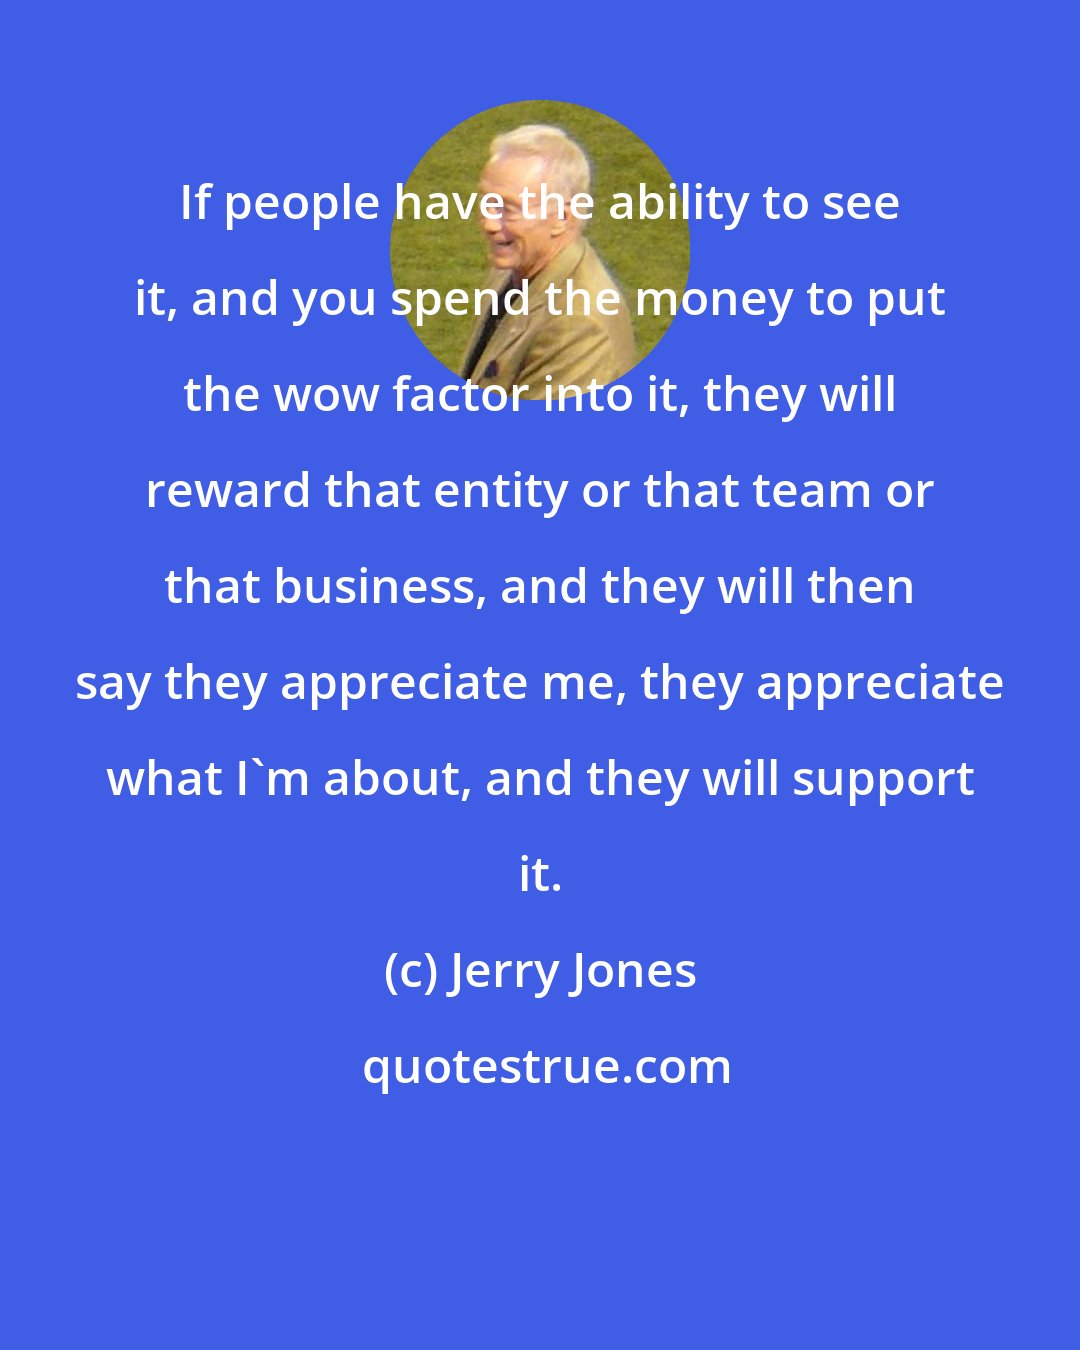 Jerry Jones: If people have the ability to see it, and you spend the money to put the wow factor into it, they will reward that entity or that team or that business, and they will then say they appreciate me, they appreciate what I'm about, and they will support it.